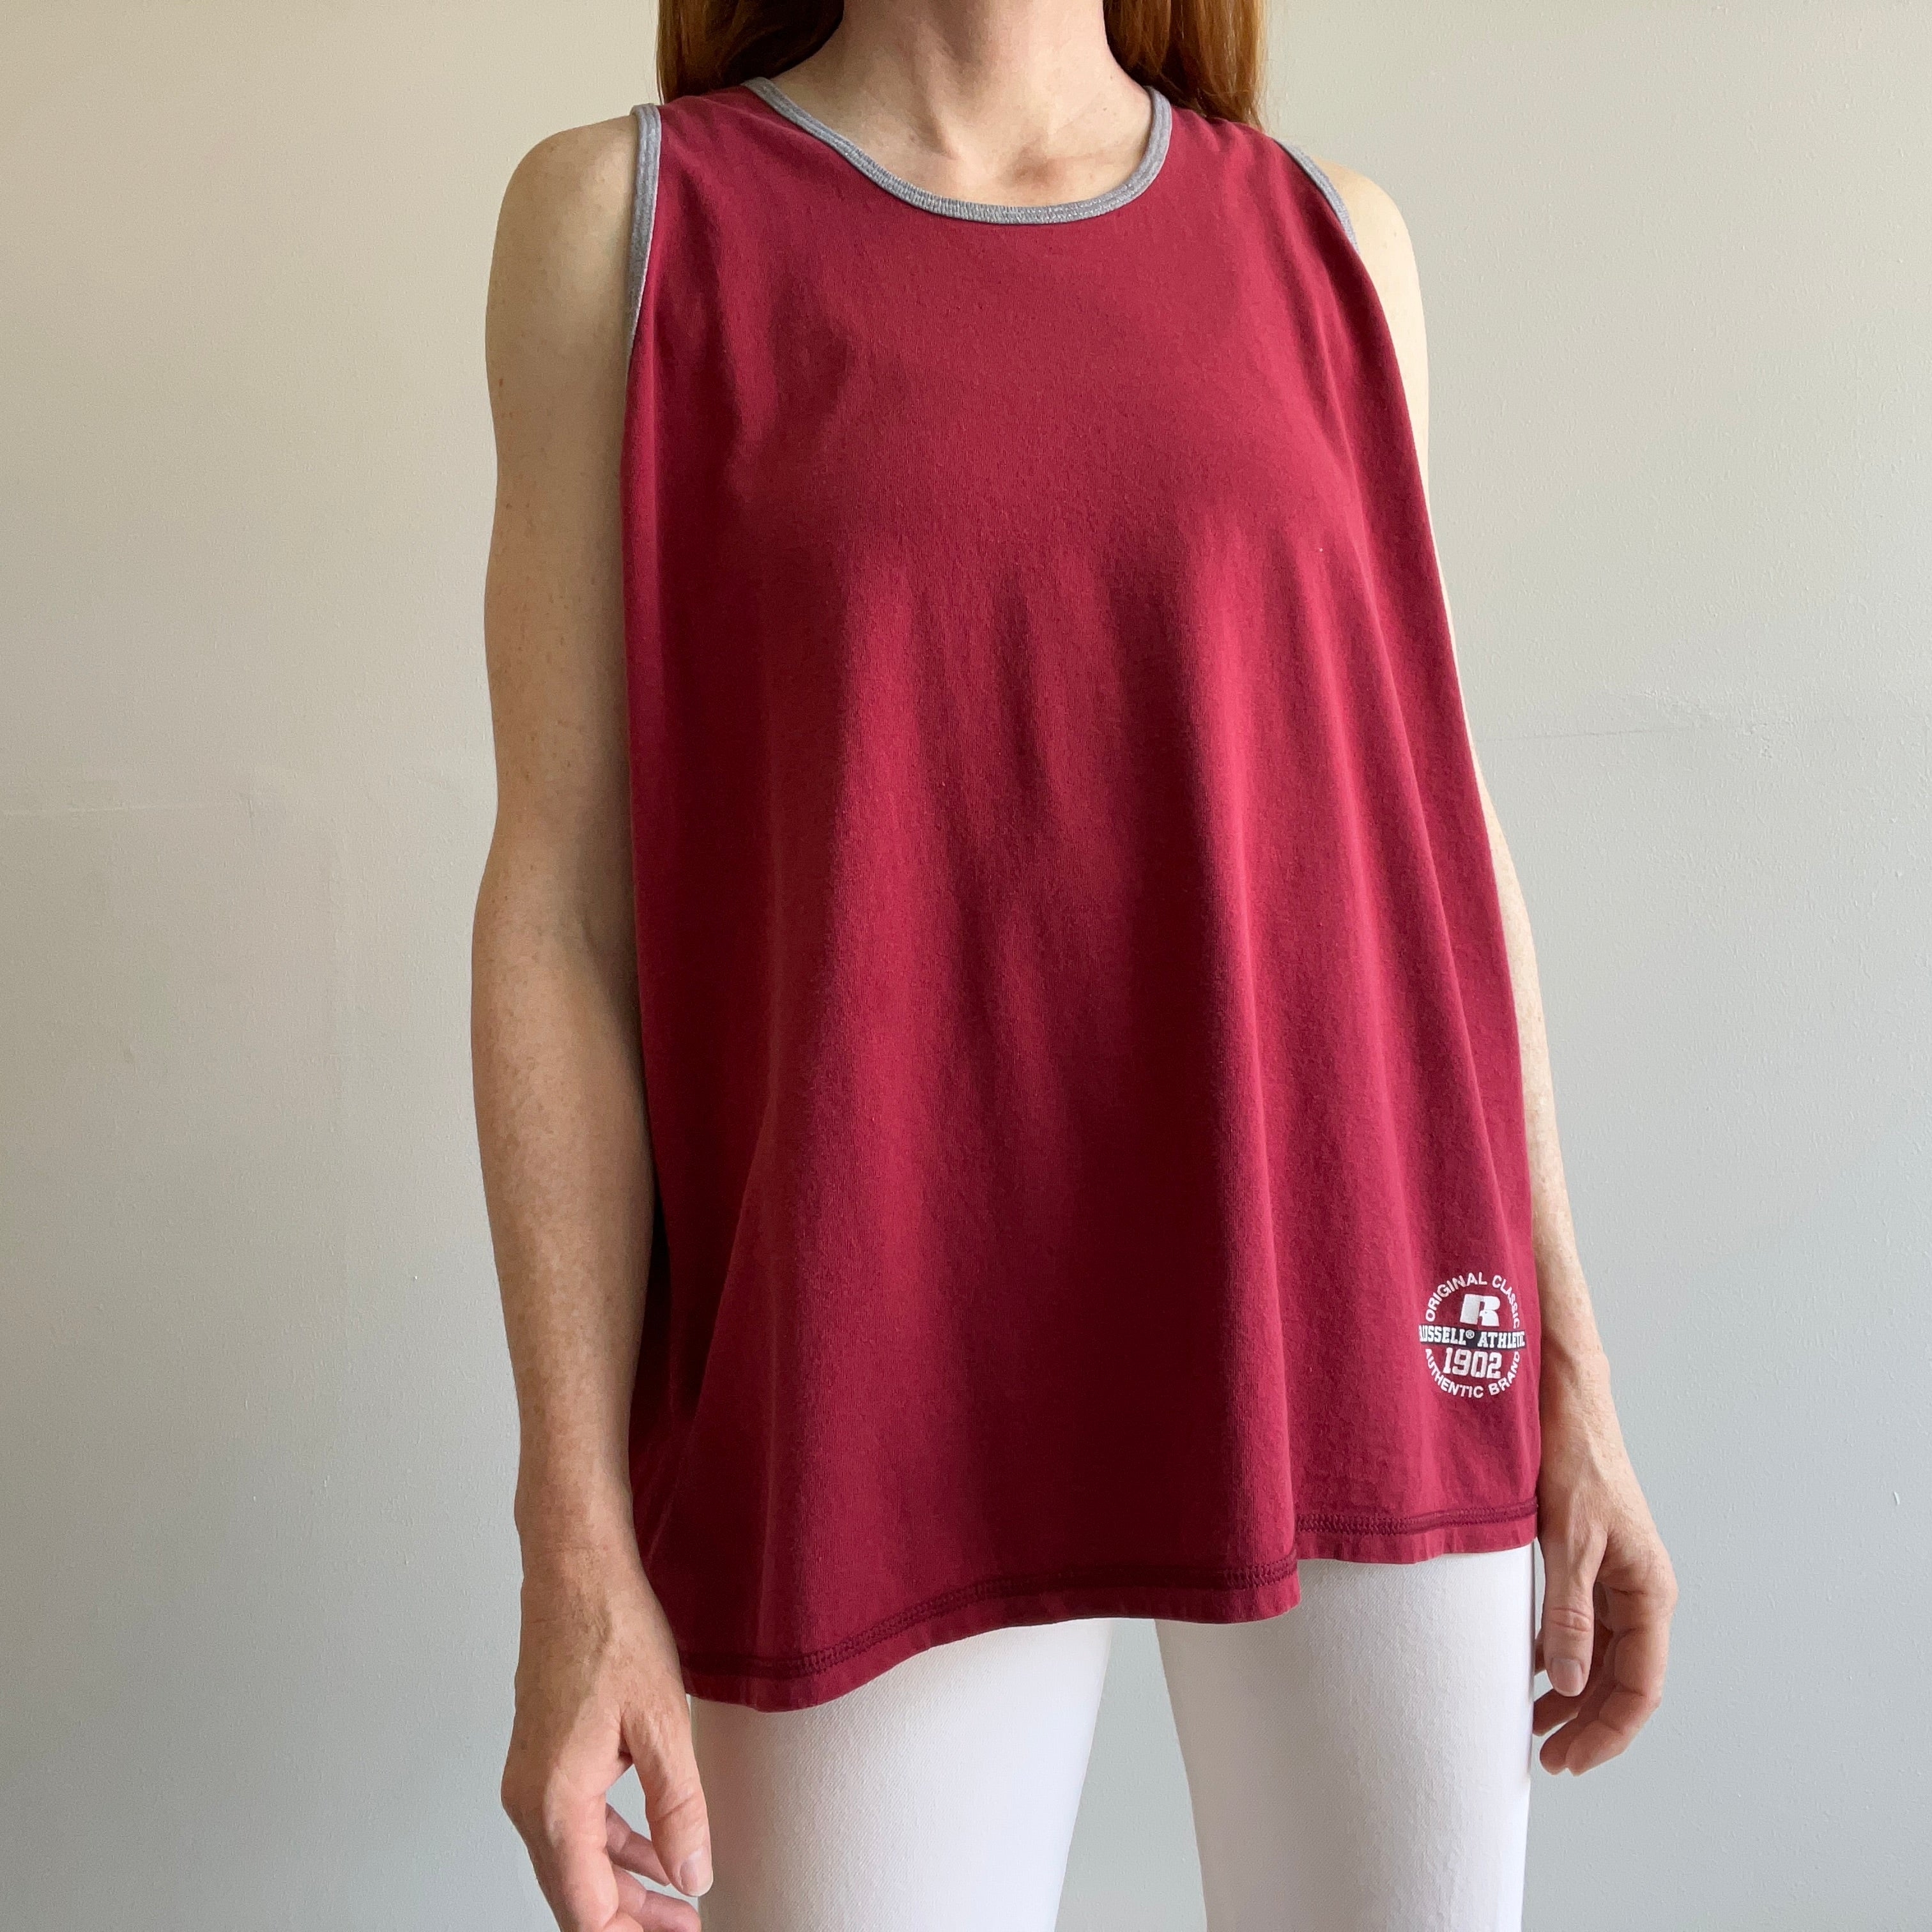 1990s Burgundy with Gray Piping Cotton Tank Top by Russell